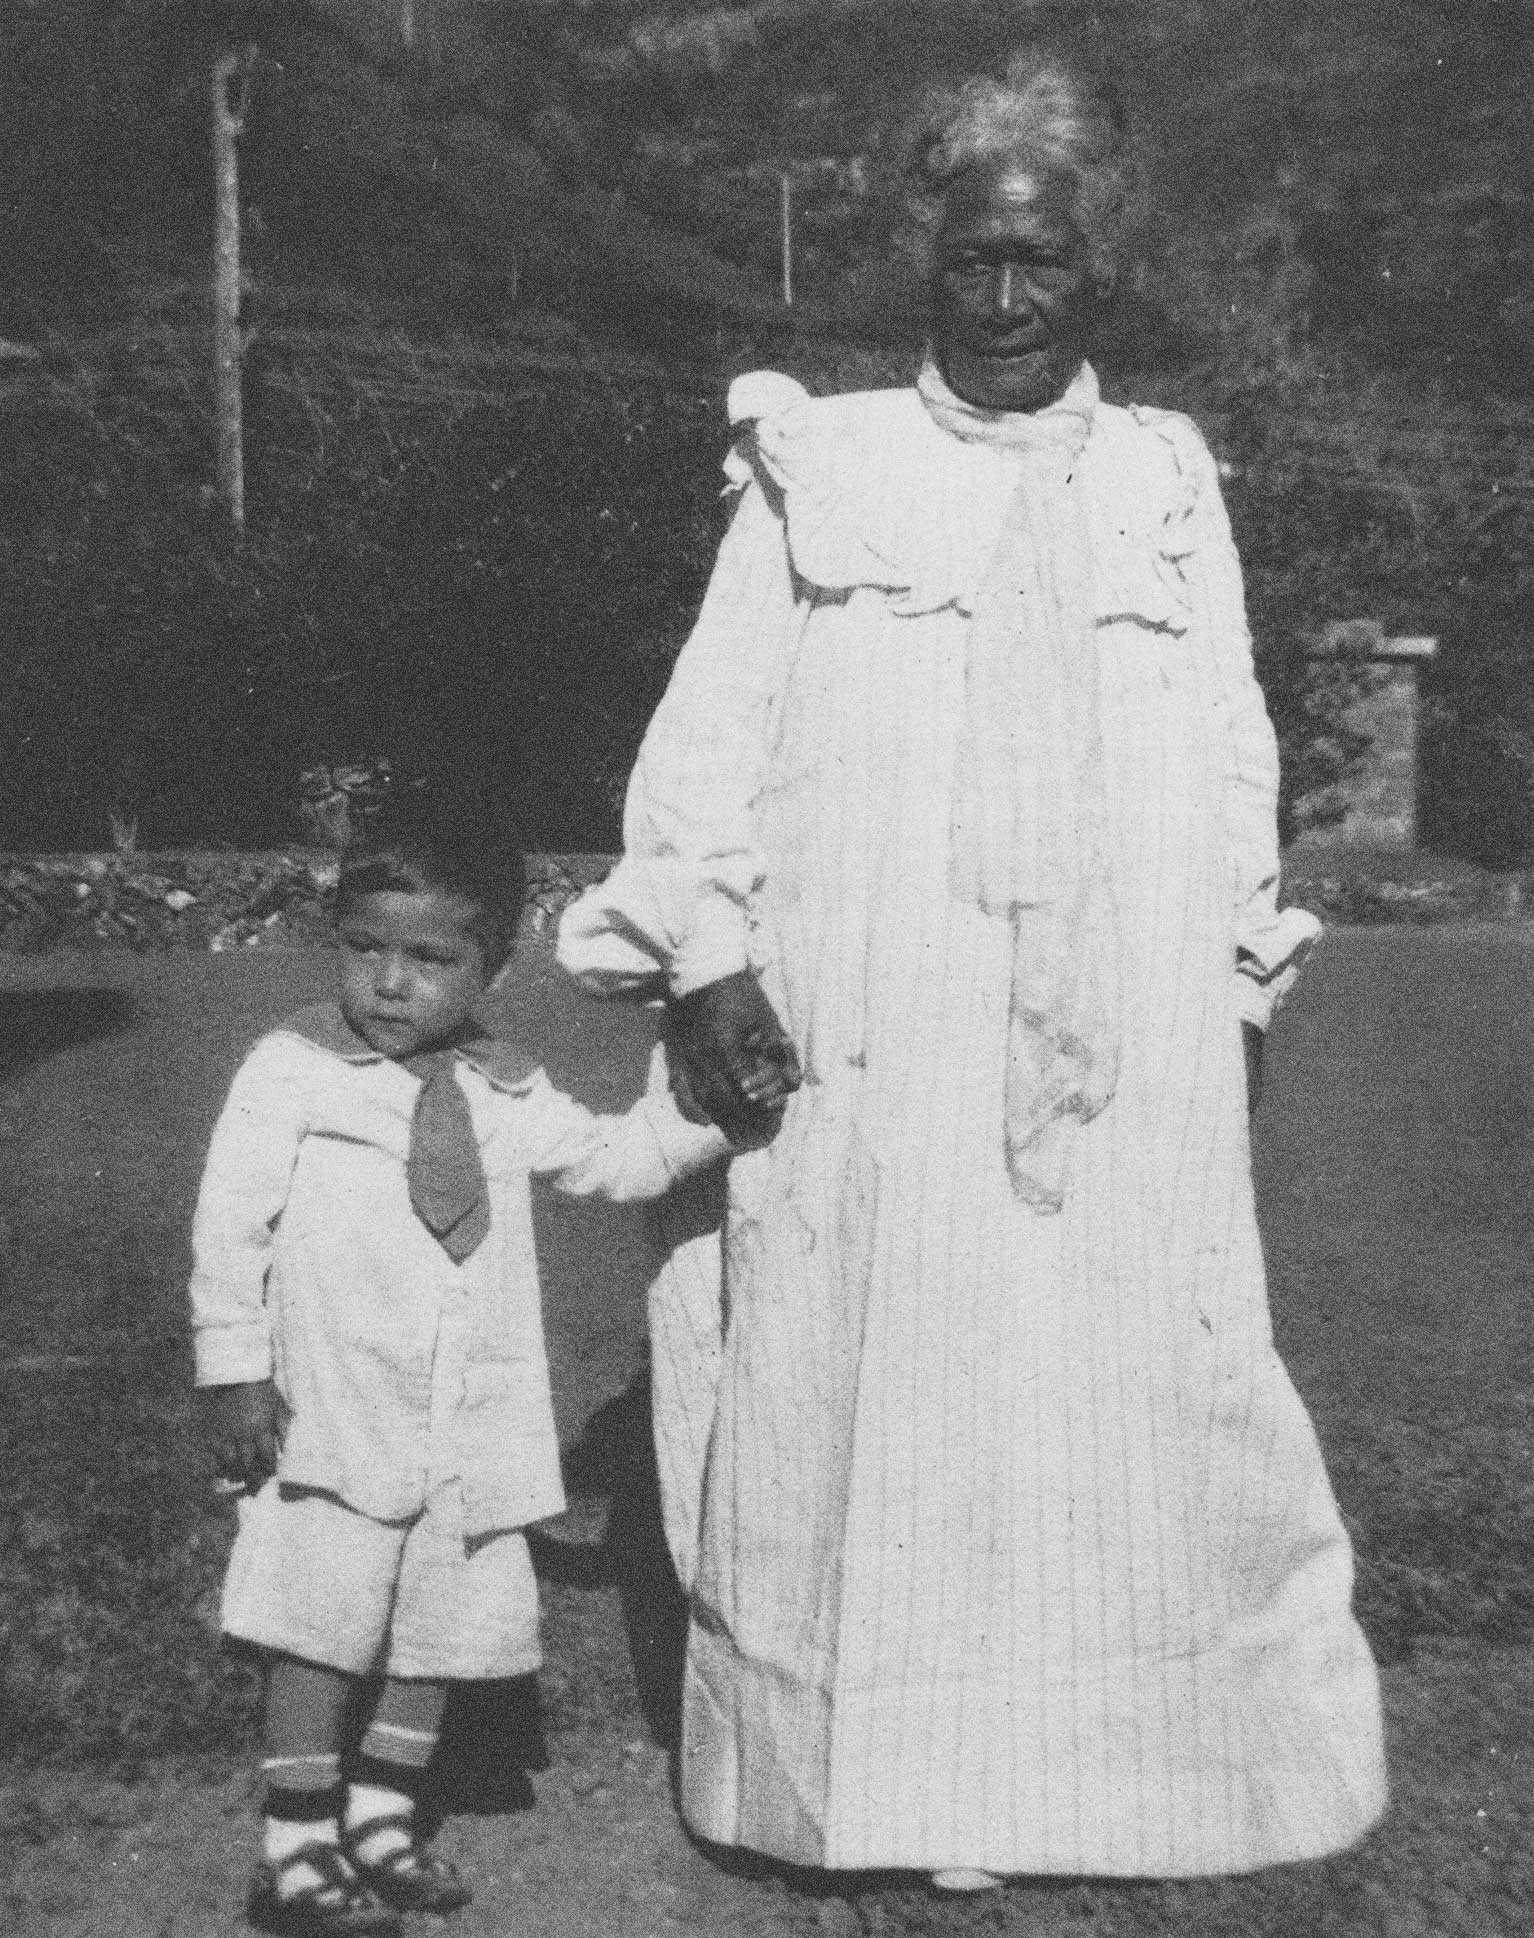 Kaahaaina with Unidentified Child